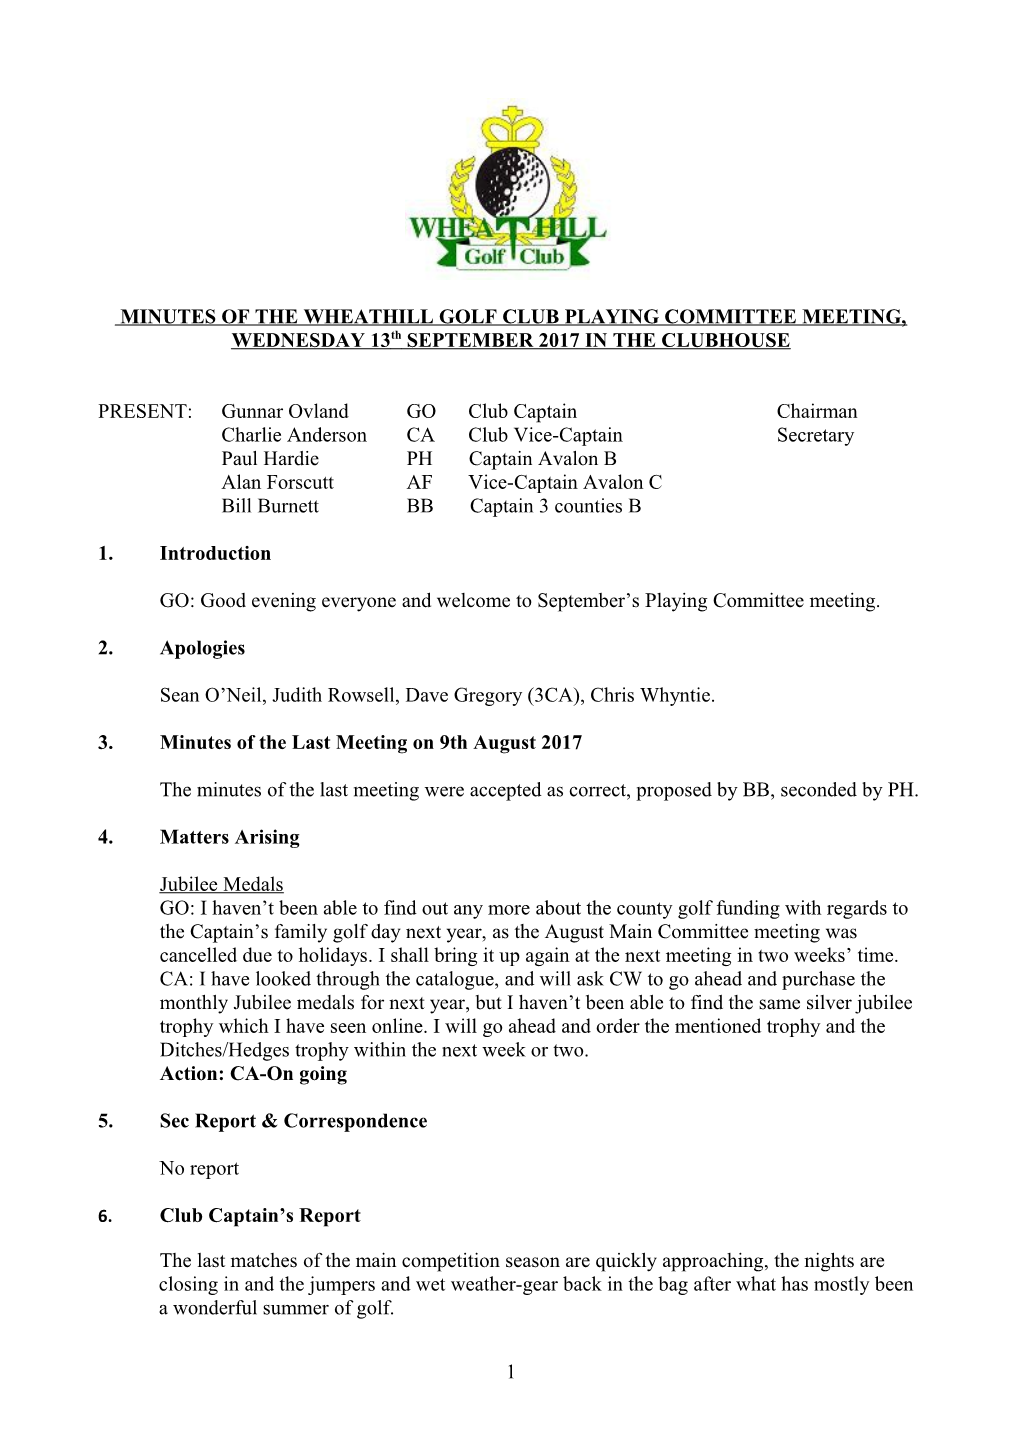 MINUTES of the WHEATHILL GOLF CLUB PLAYING COMMITTEE MEETING, WEDNESDAY 13Th SEPTEMBER2017